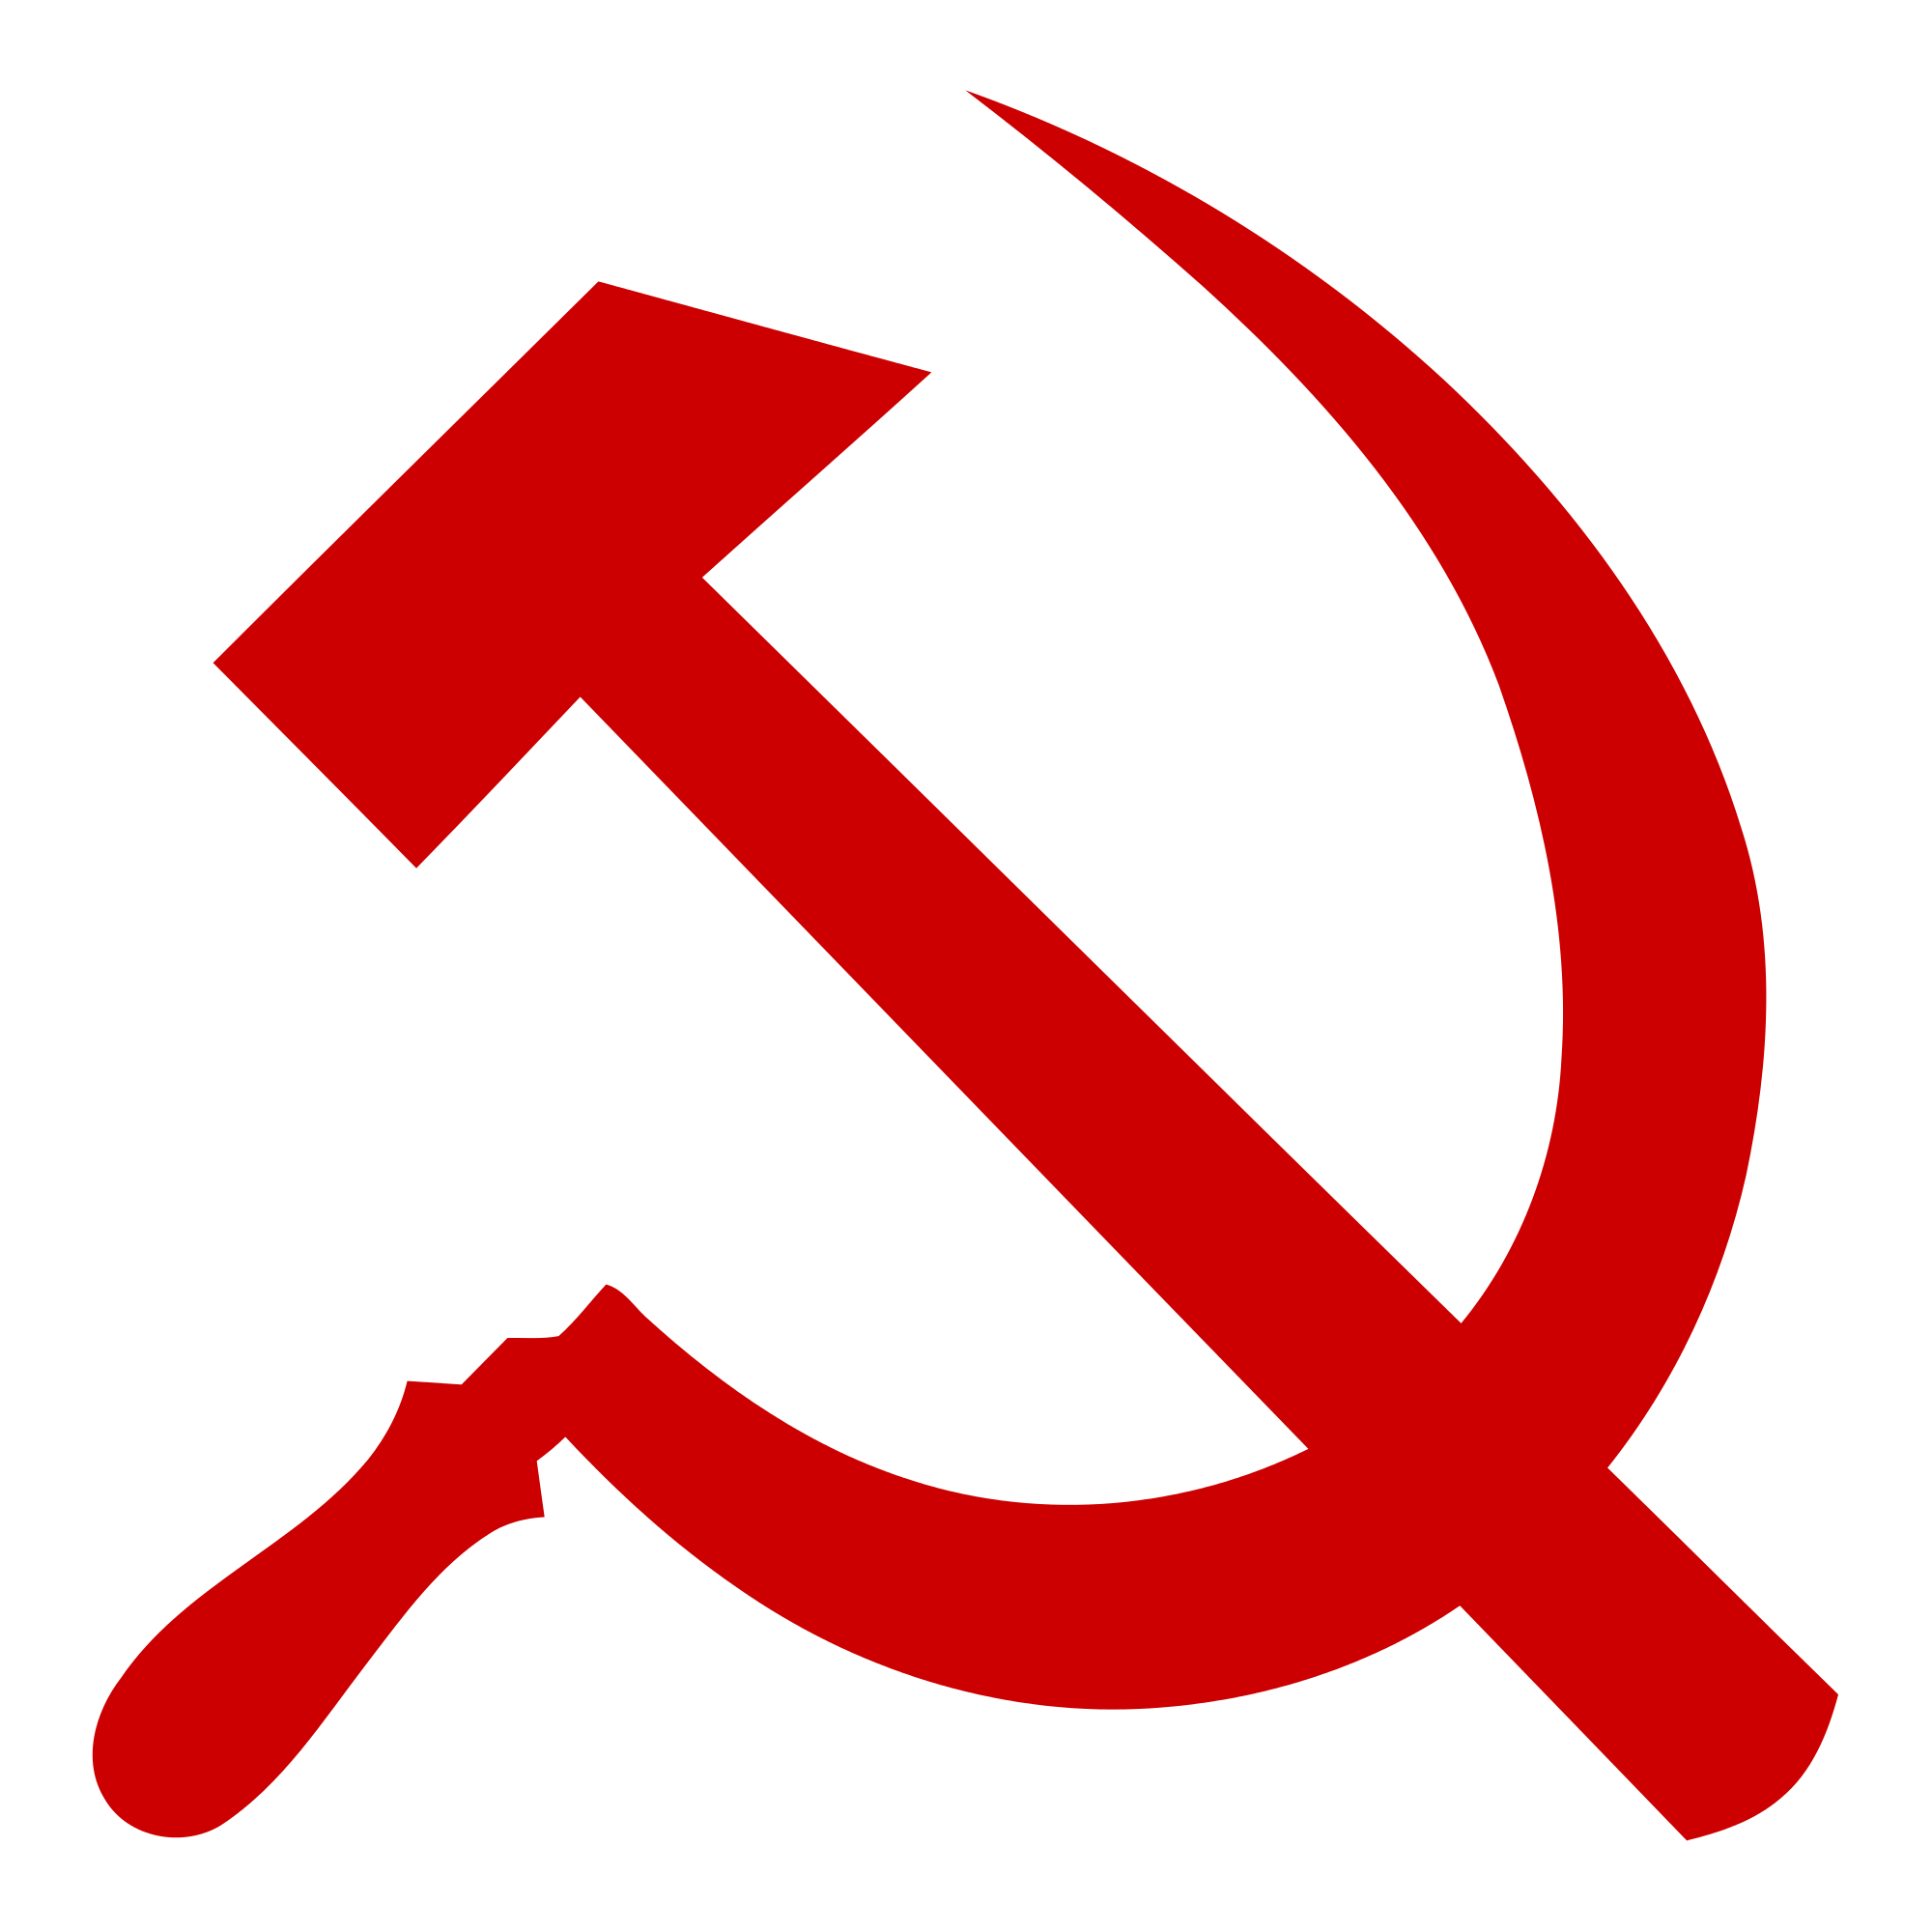 Hammer and sickle - Wikipedia, the free encyclopedia